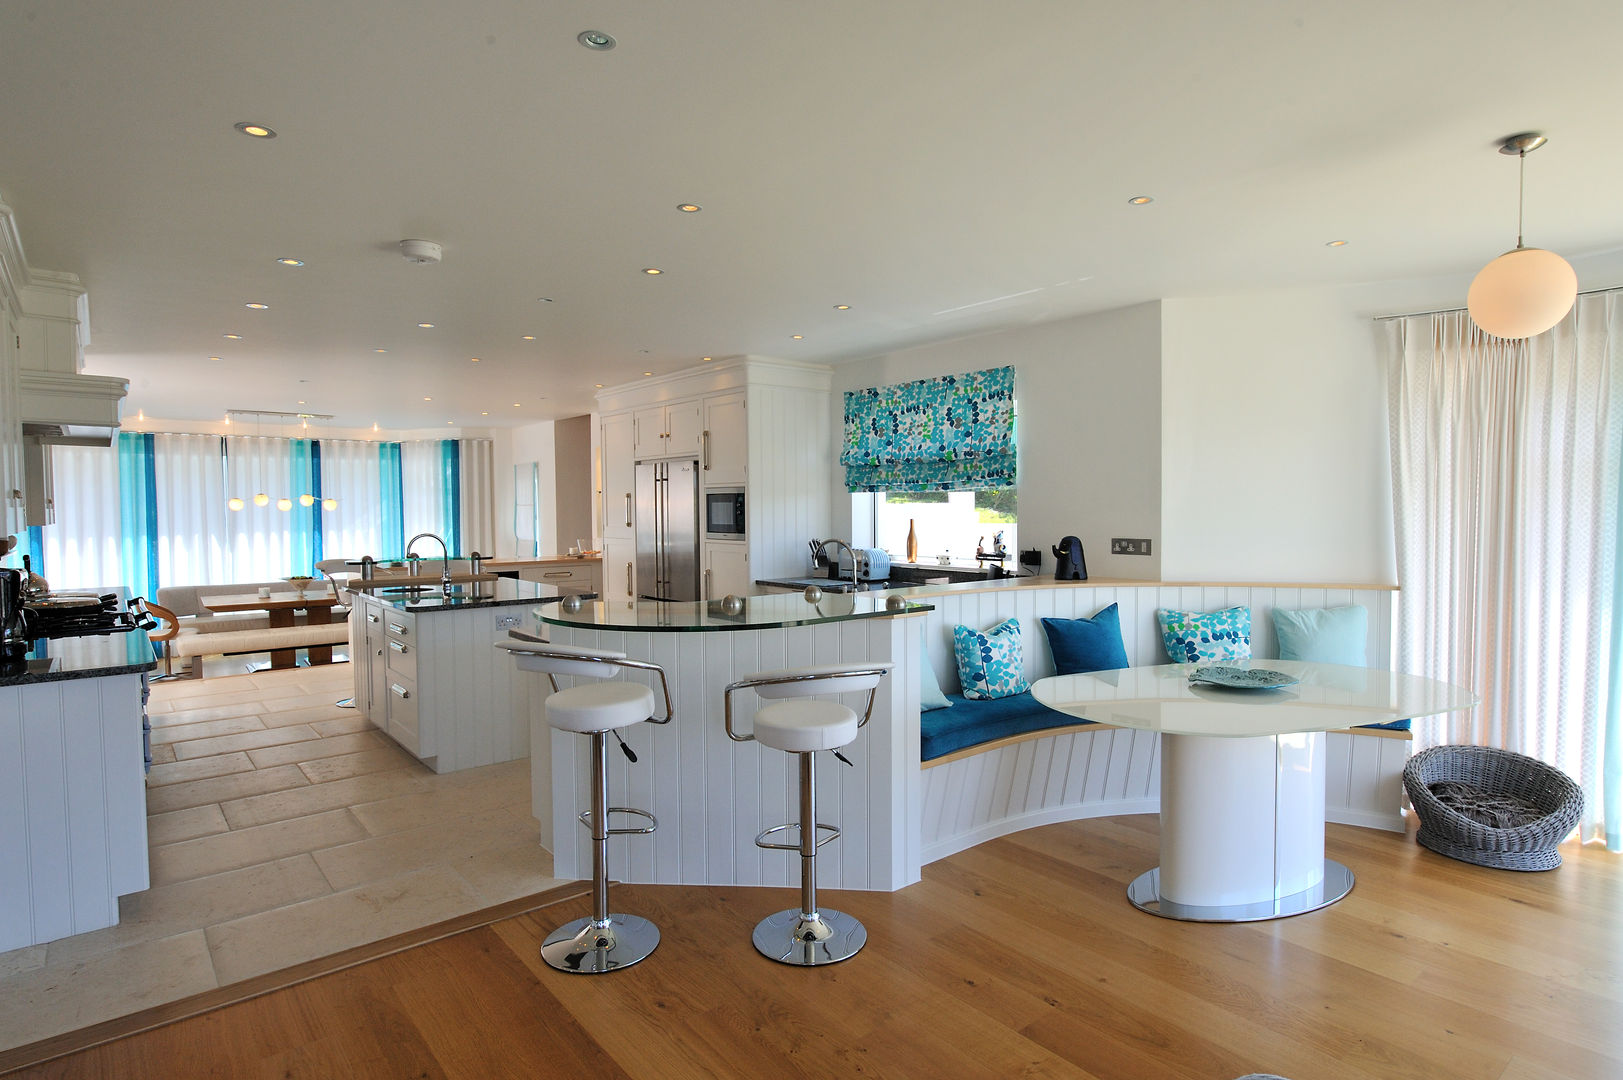 Sea House, Porth | Cornwall, Perfect Stays Perfect Stays Ausgefallene Esszimmer dining room,bar stools,kitchen,beach house,wooden flooring,interior,holiday home